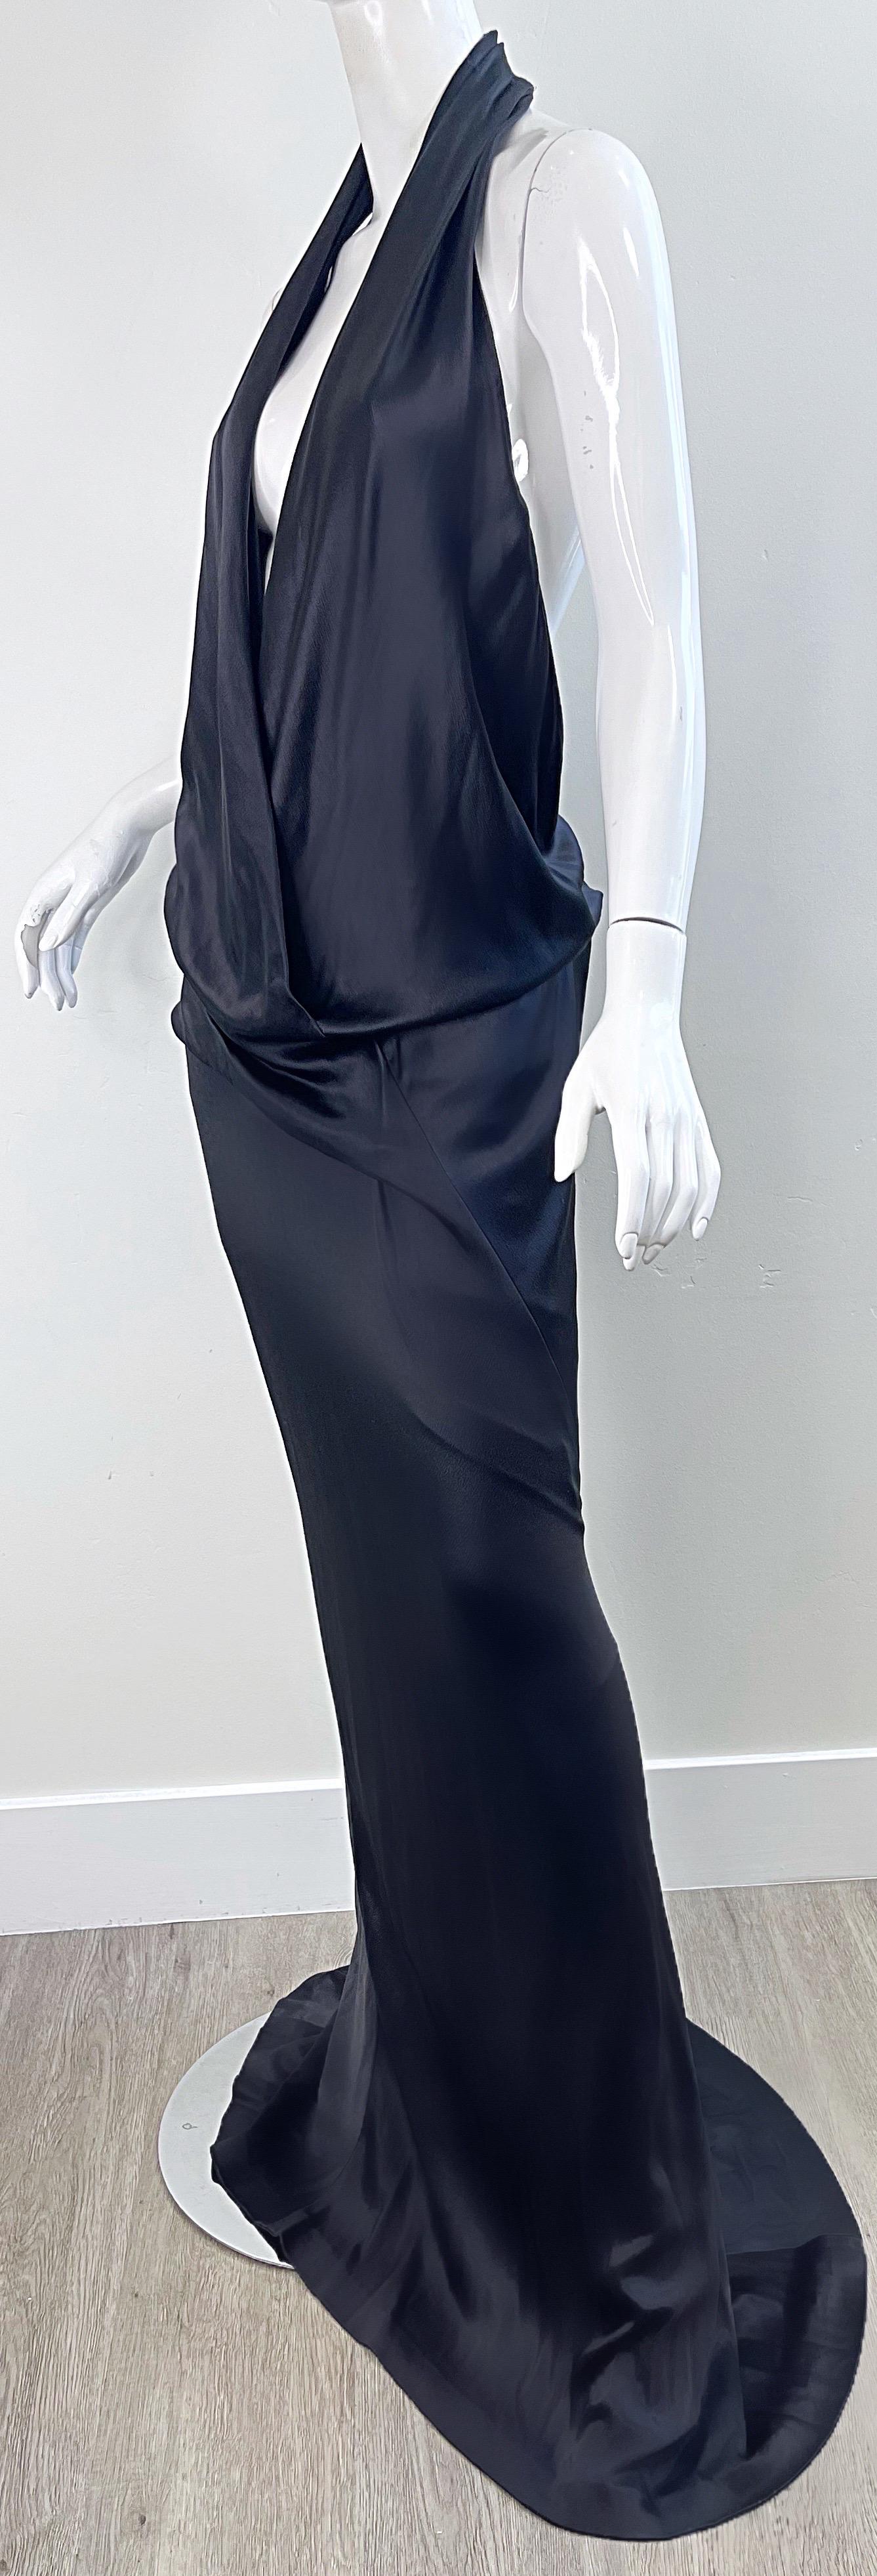 NWT Donna Karan Fall 2010 Runway Size 10 Anthracite Grey Plunging Silk Gown For Sale 6